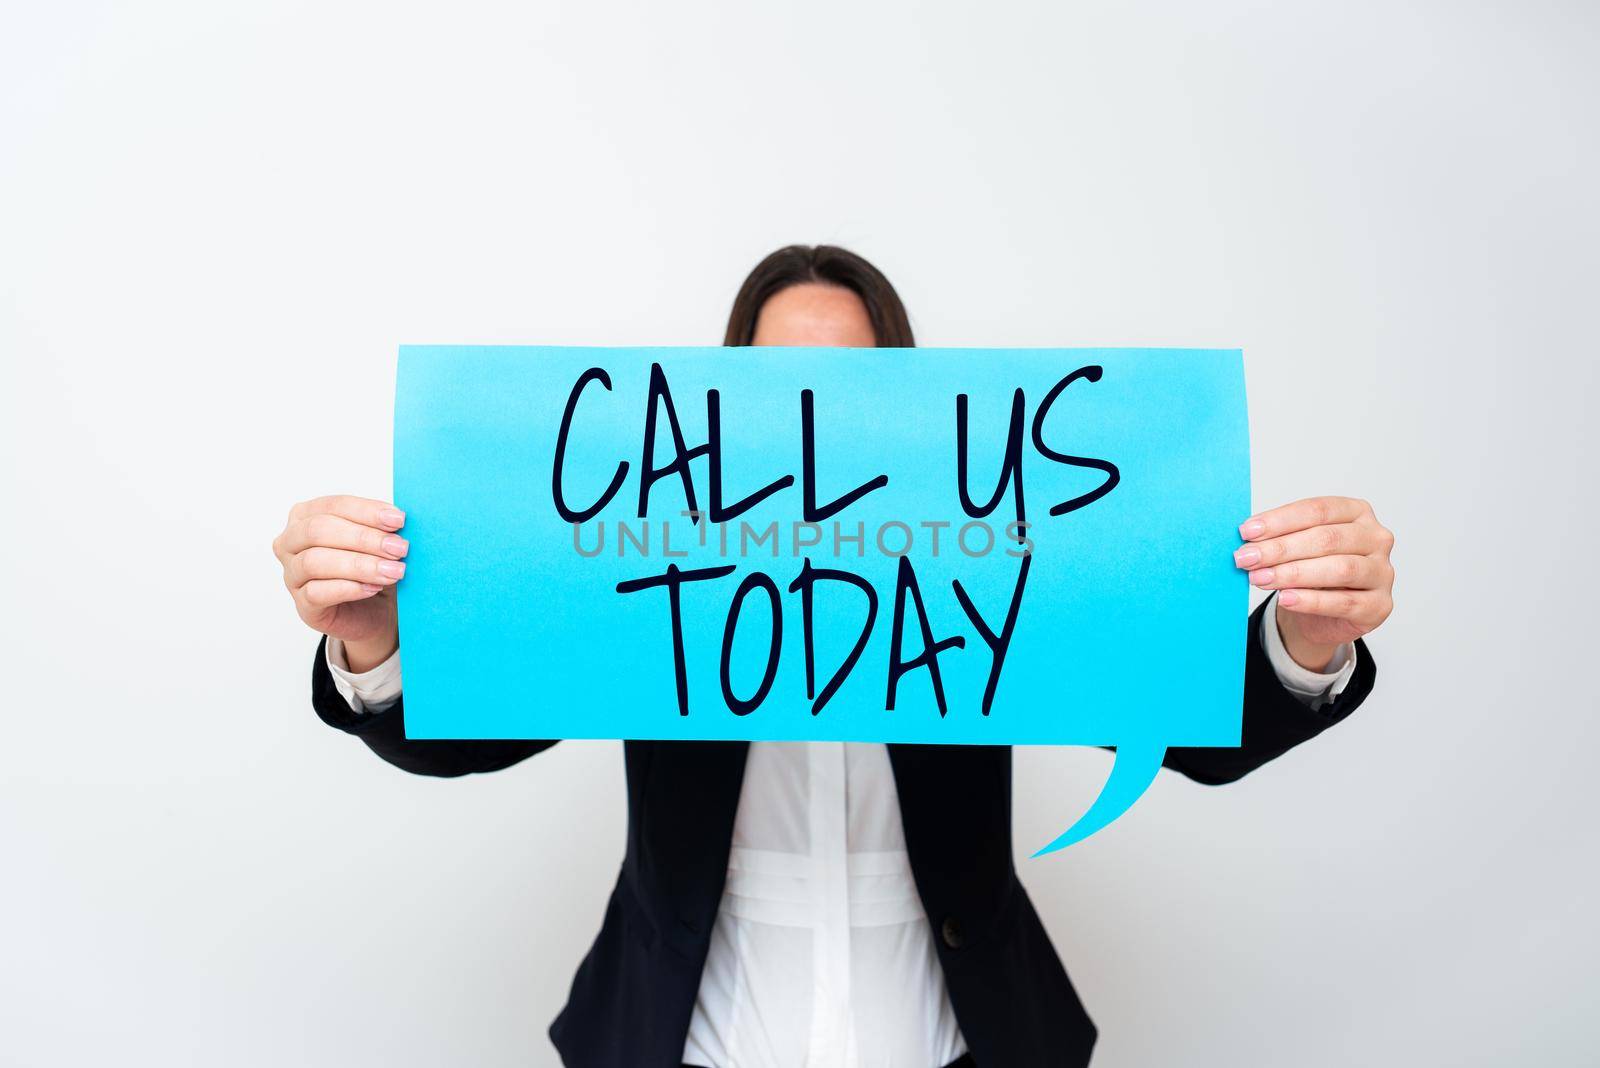 Hand writing sign Call Us Today, Business overview Make a telephone calling to ask for advice or support Important Messages Presented On Piece Of Paper On Desk With Books.